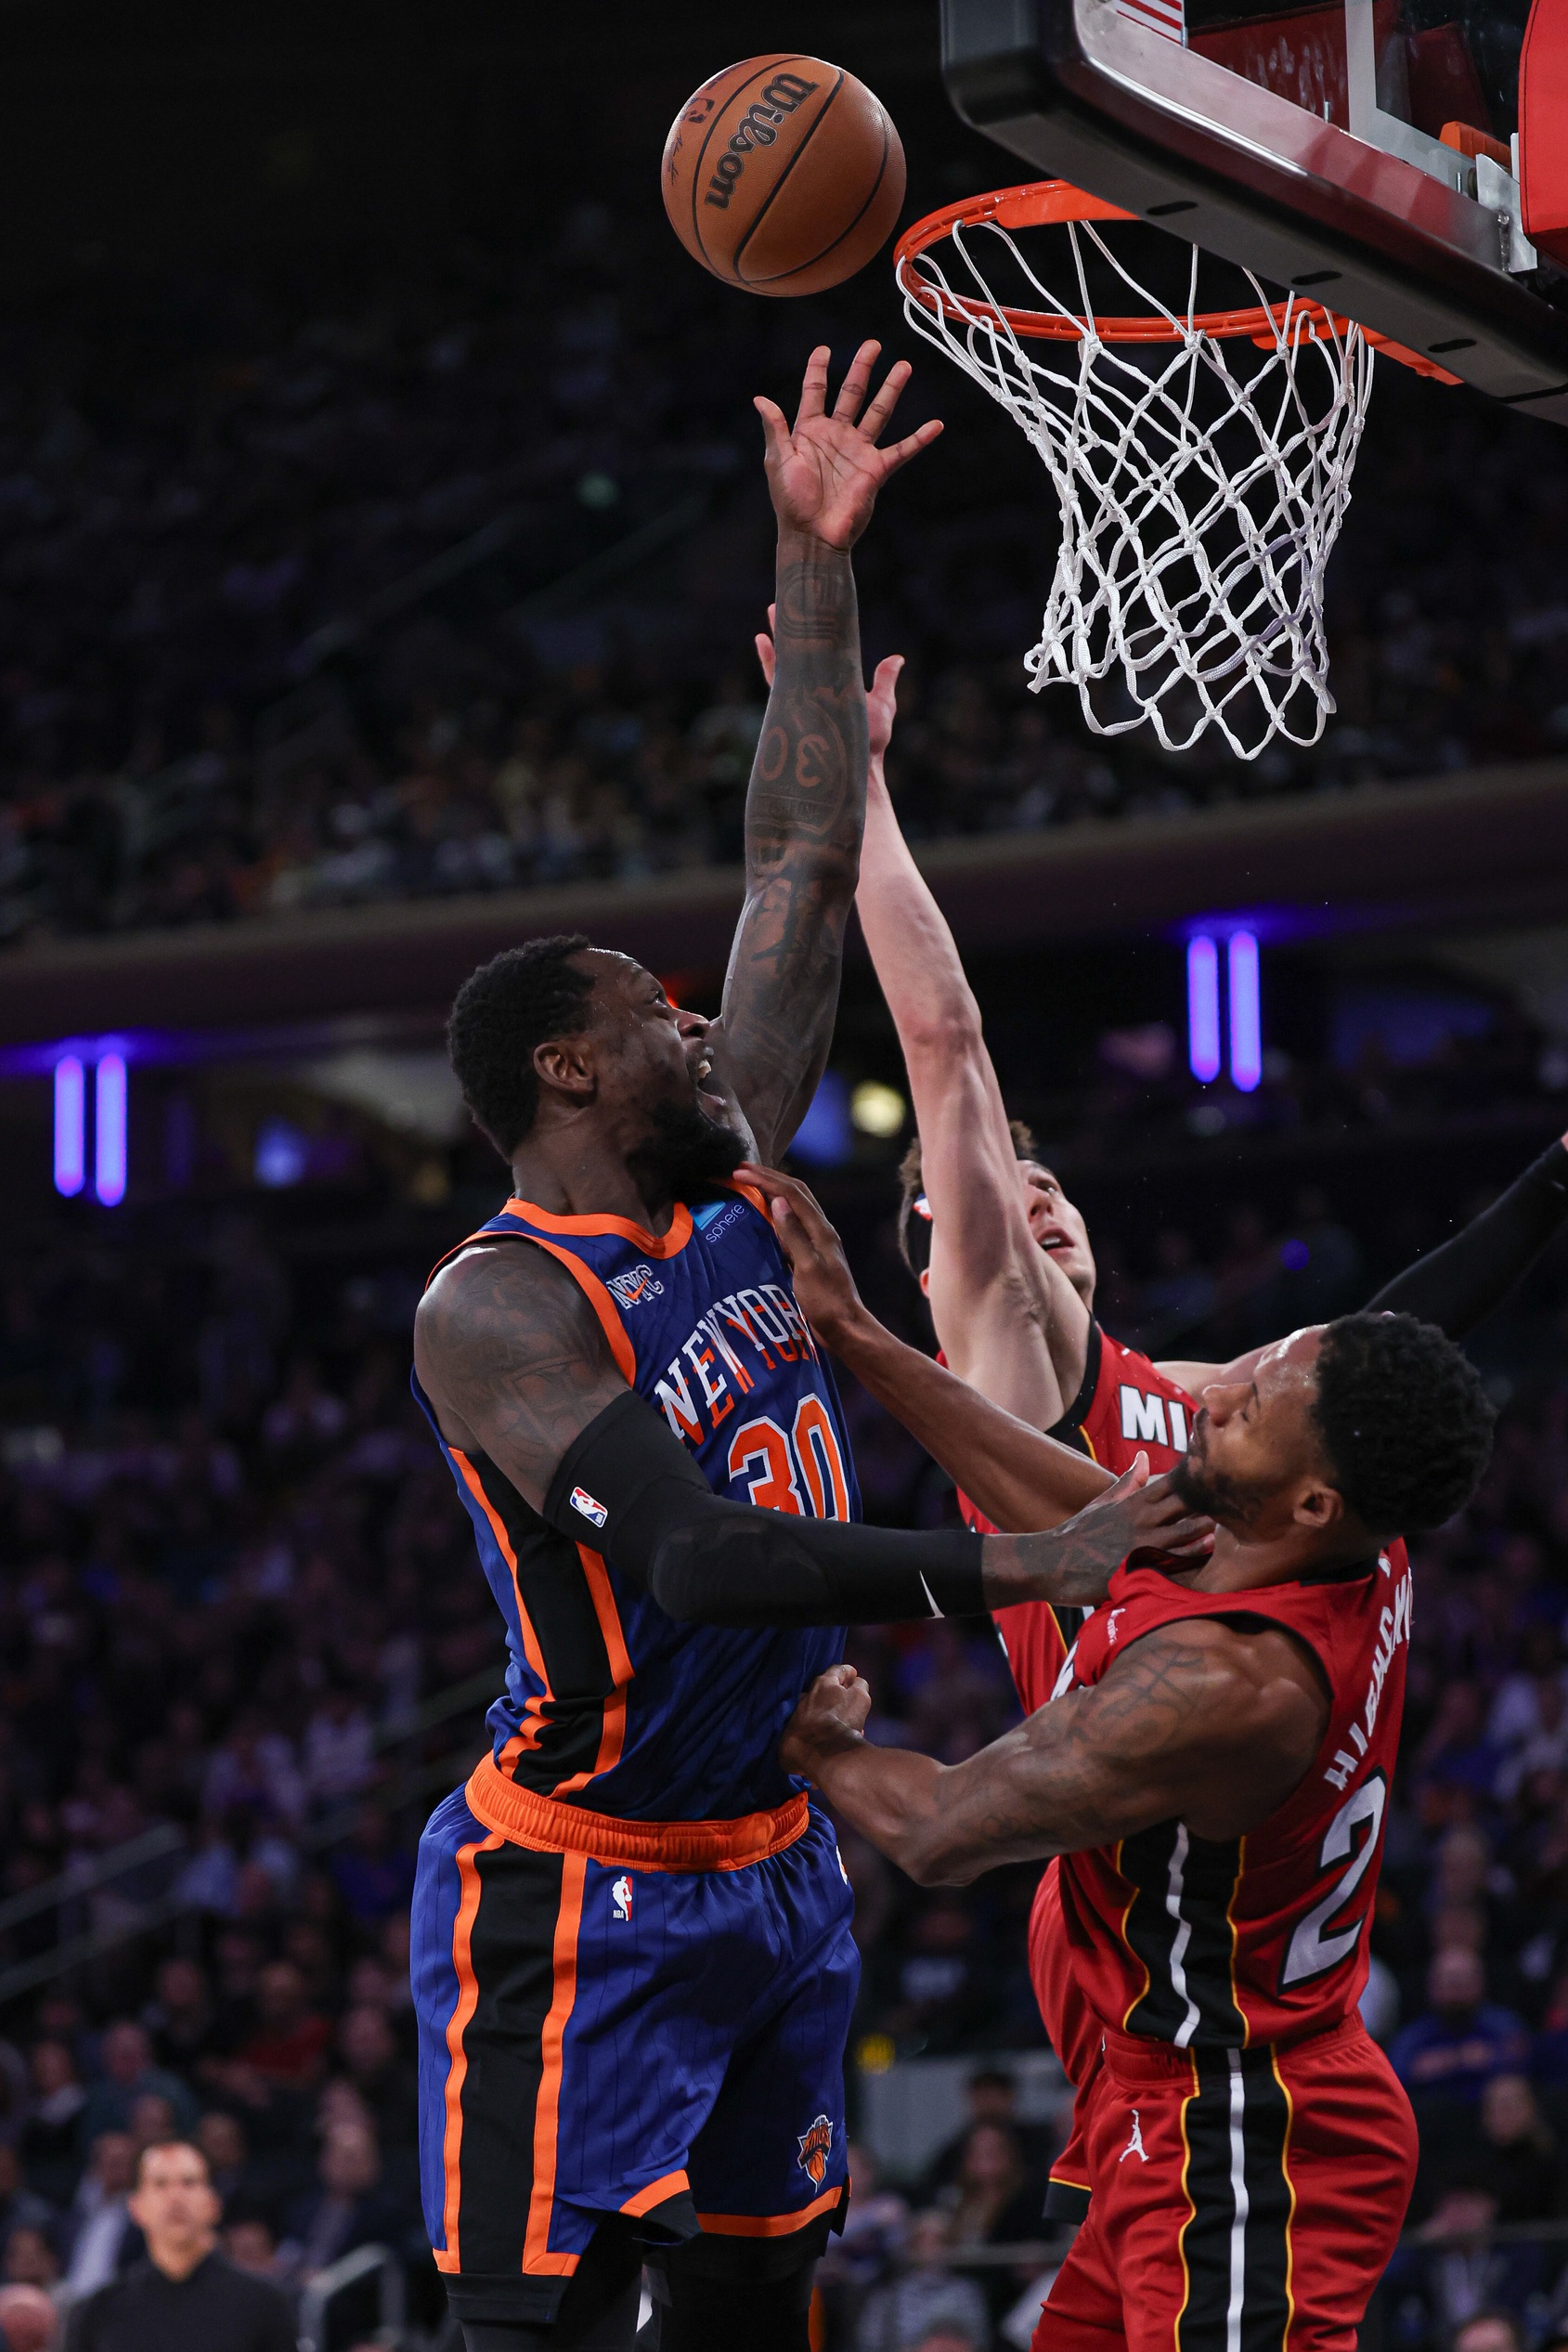 New York Knicks forward Julius Randle (30) shoots the ball as Miami Heat forward Haywood Highsmith (24) defends during the second half at Madison Square Garden.